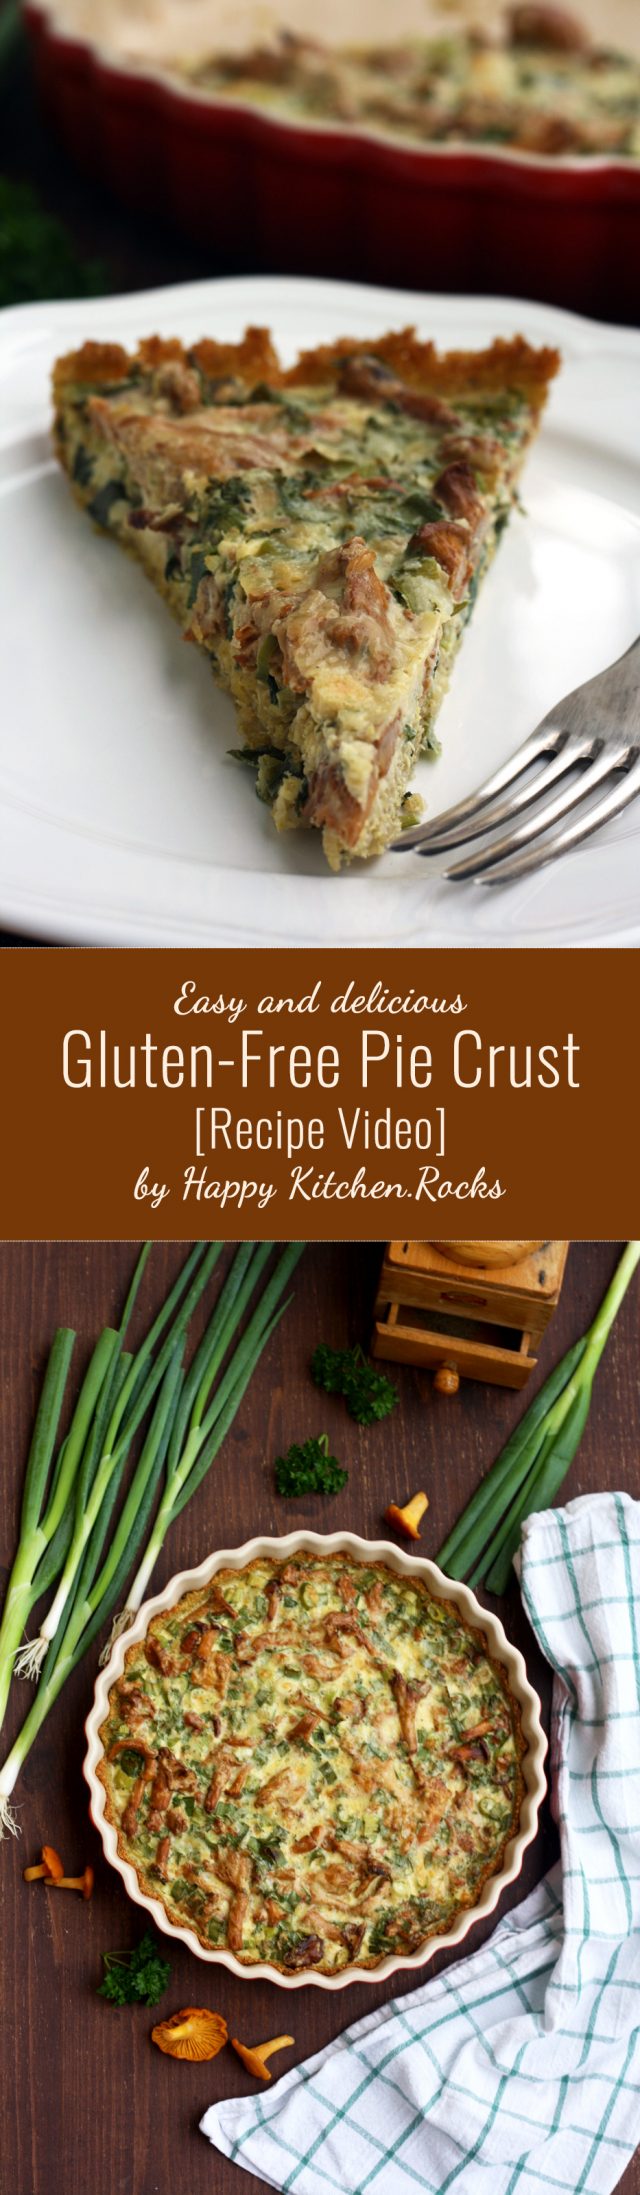 This easy 2-ingredient whole grain gluten-free pie crust video recipe is life-changing! It holds together perfectly and fits to any filling, sweet or savory!